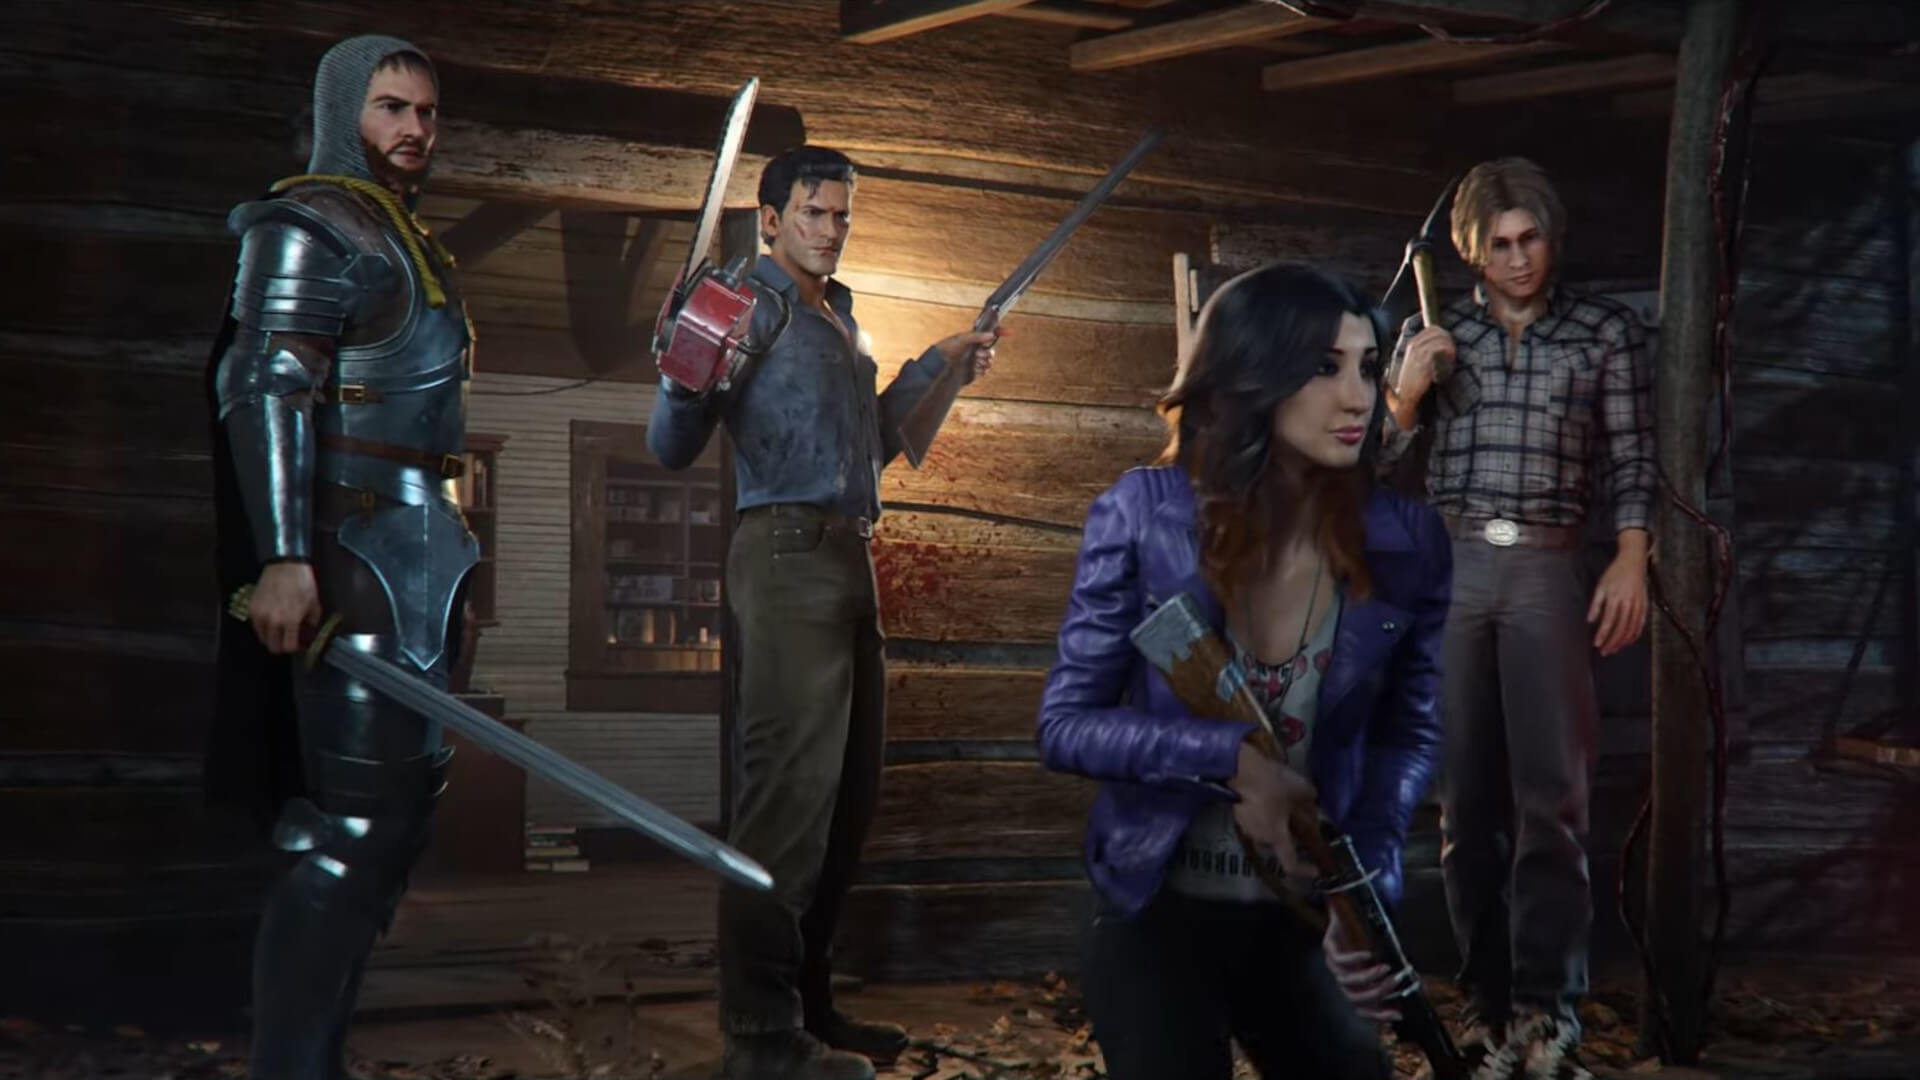 The cast of Evil Dead: The Game getting ready to face off against monsters